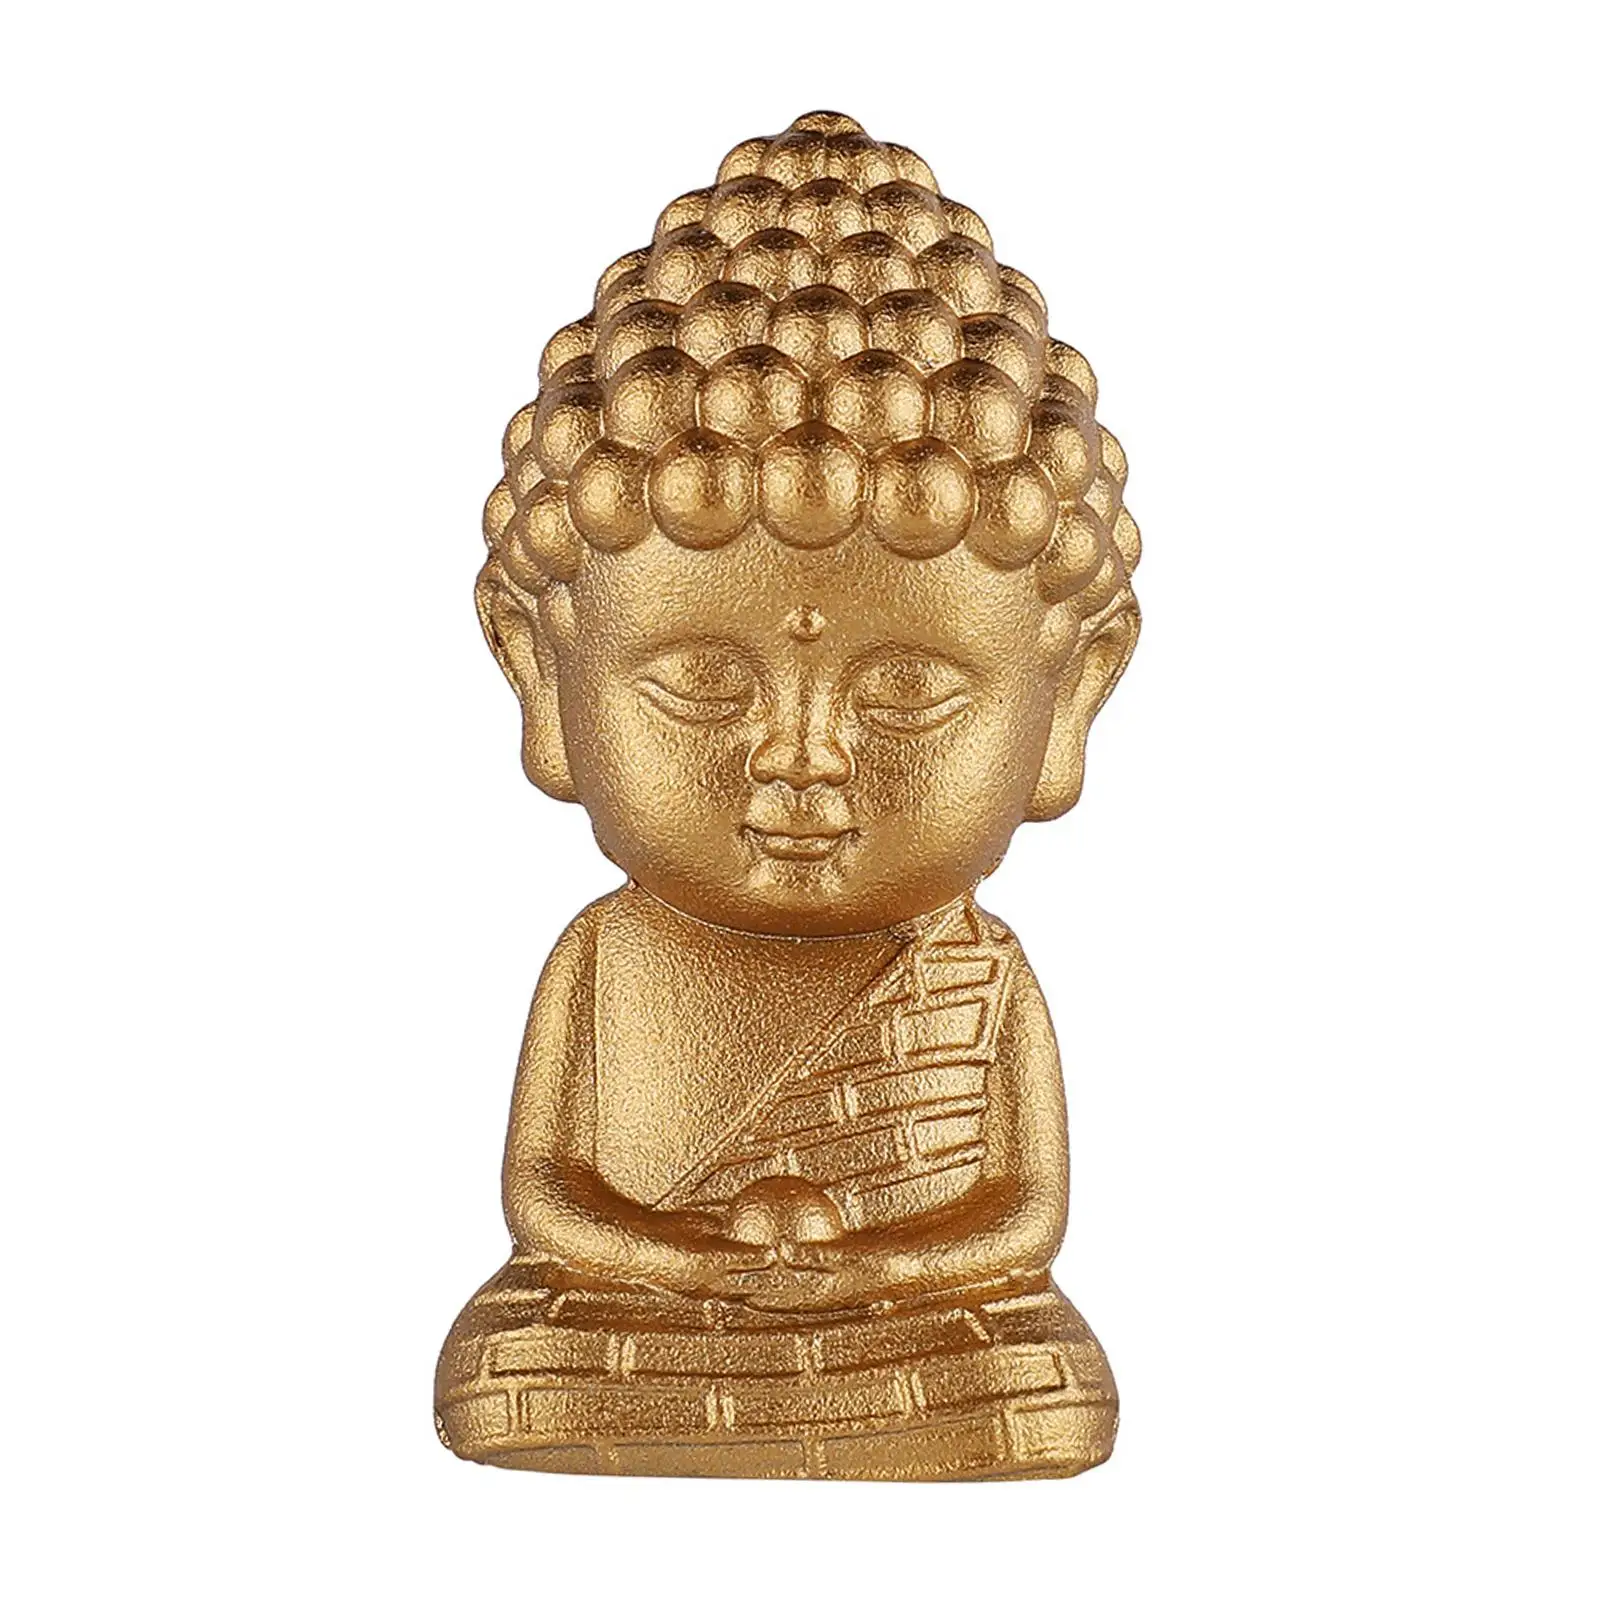 Miniature Buddha Statue Decorative Collectibles Fengshui Furnishing Gifts Sculpture for Living Room Housewarming Study Office